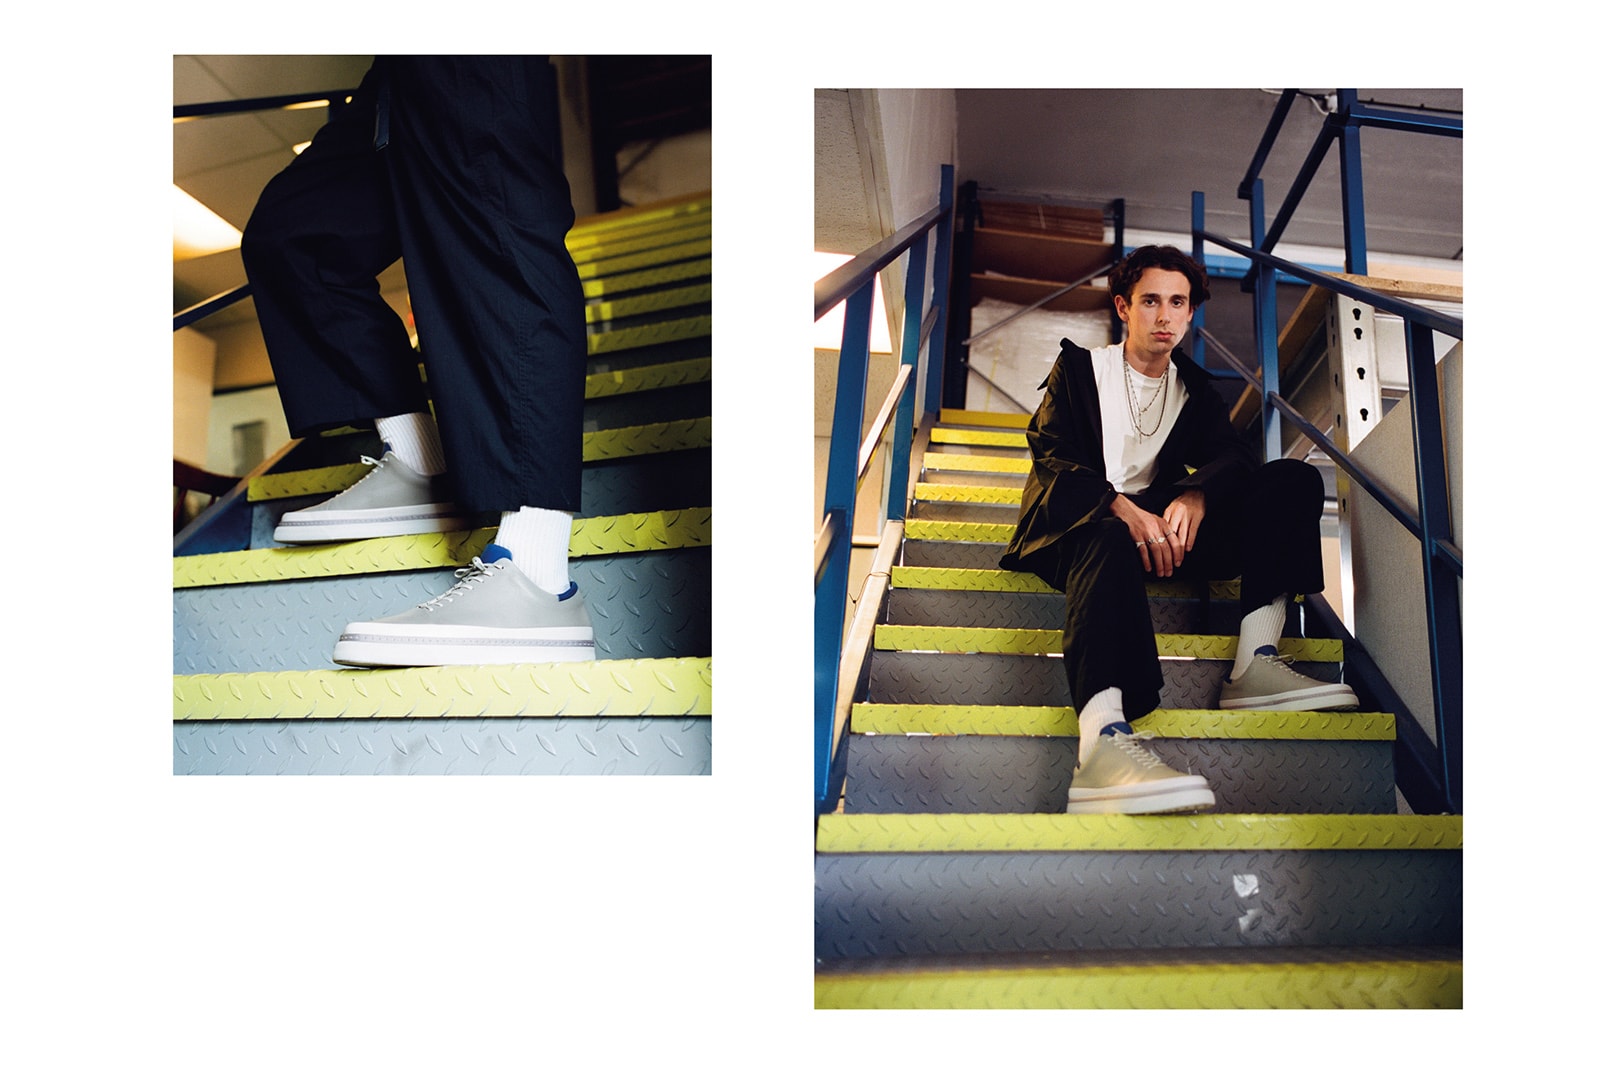 Auxiliary Vol. 1 Footwear Lookbook Shoes Trainers Sneakers Kicks Cop Purchase Buy Available Selfridges Liberty London Booming Late 80's 90's Economy Premium Brand Matthew Taylor Designer Eddie Wailes